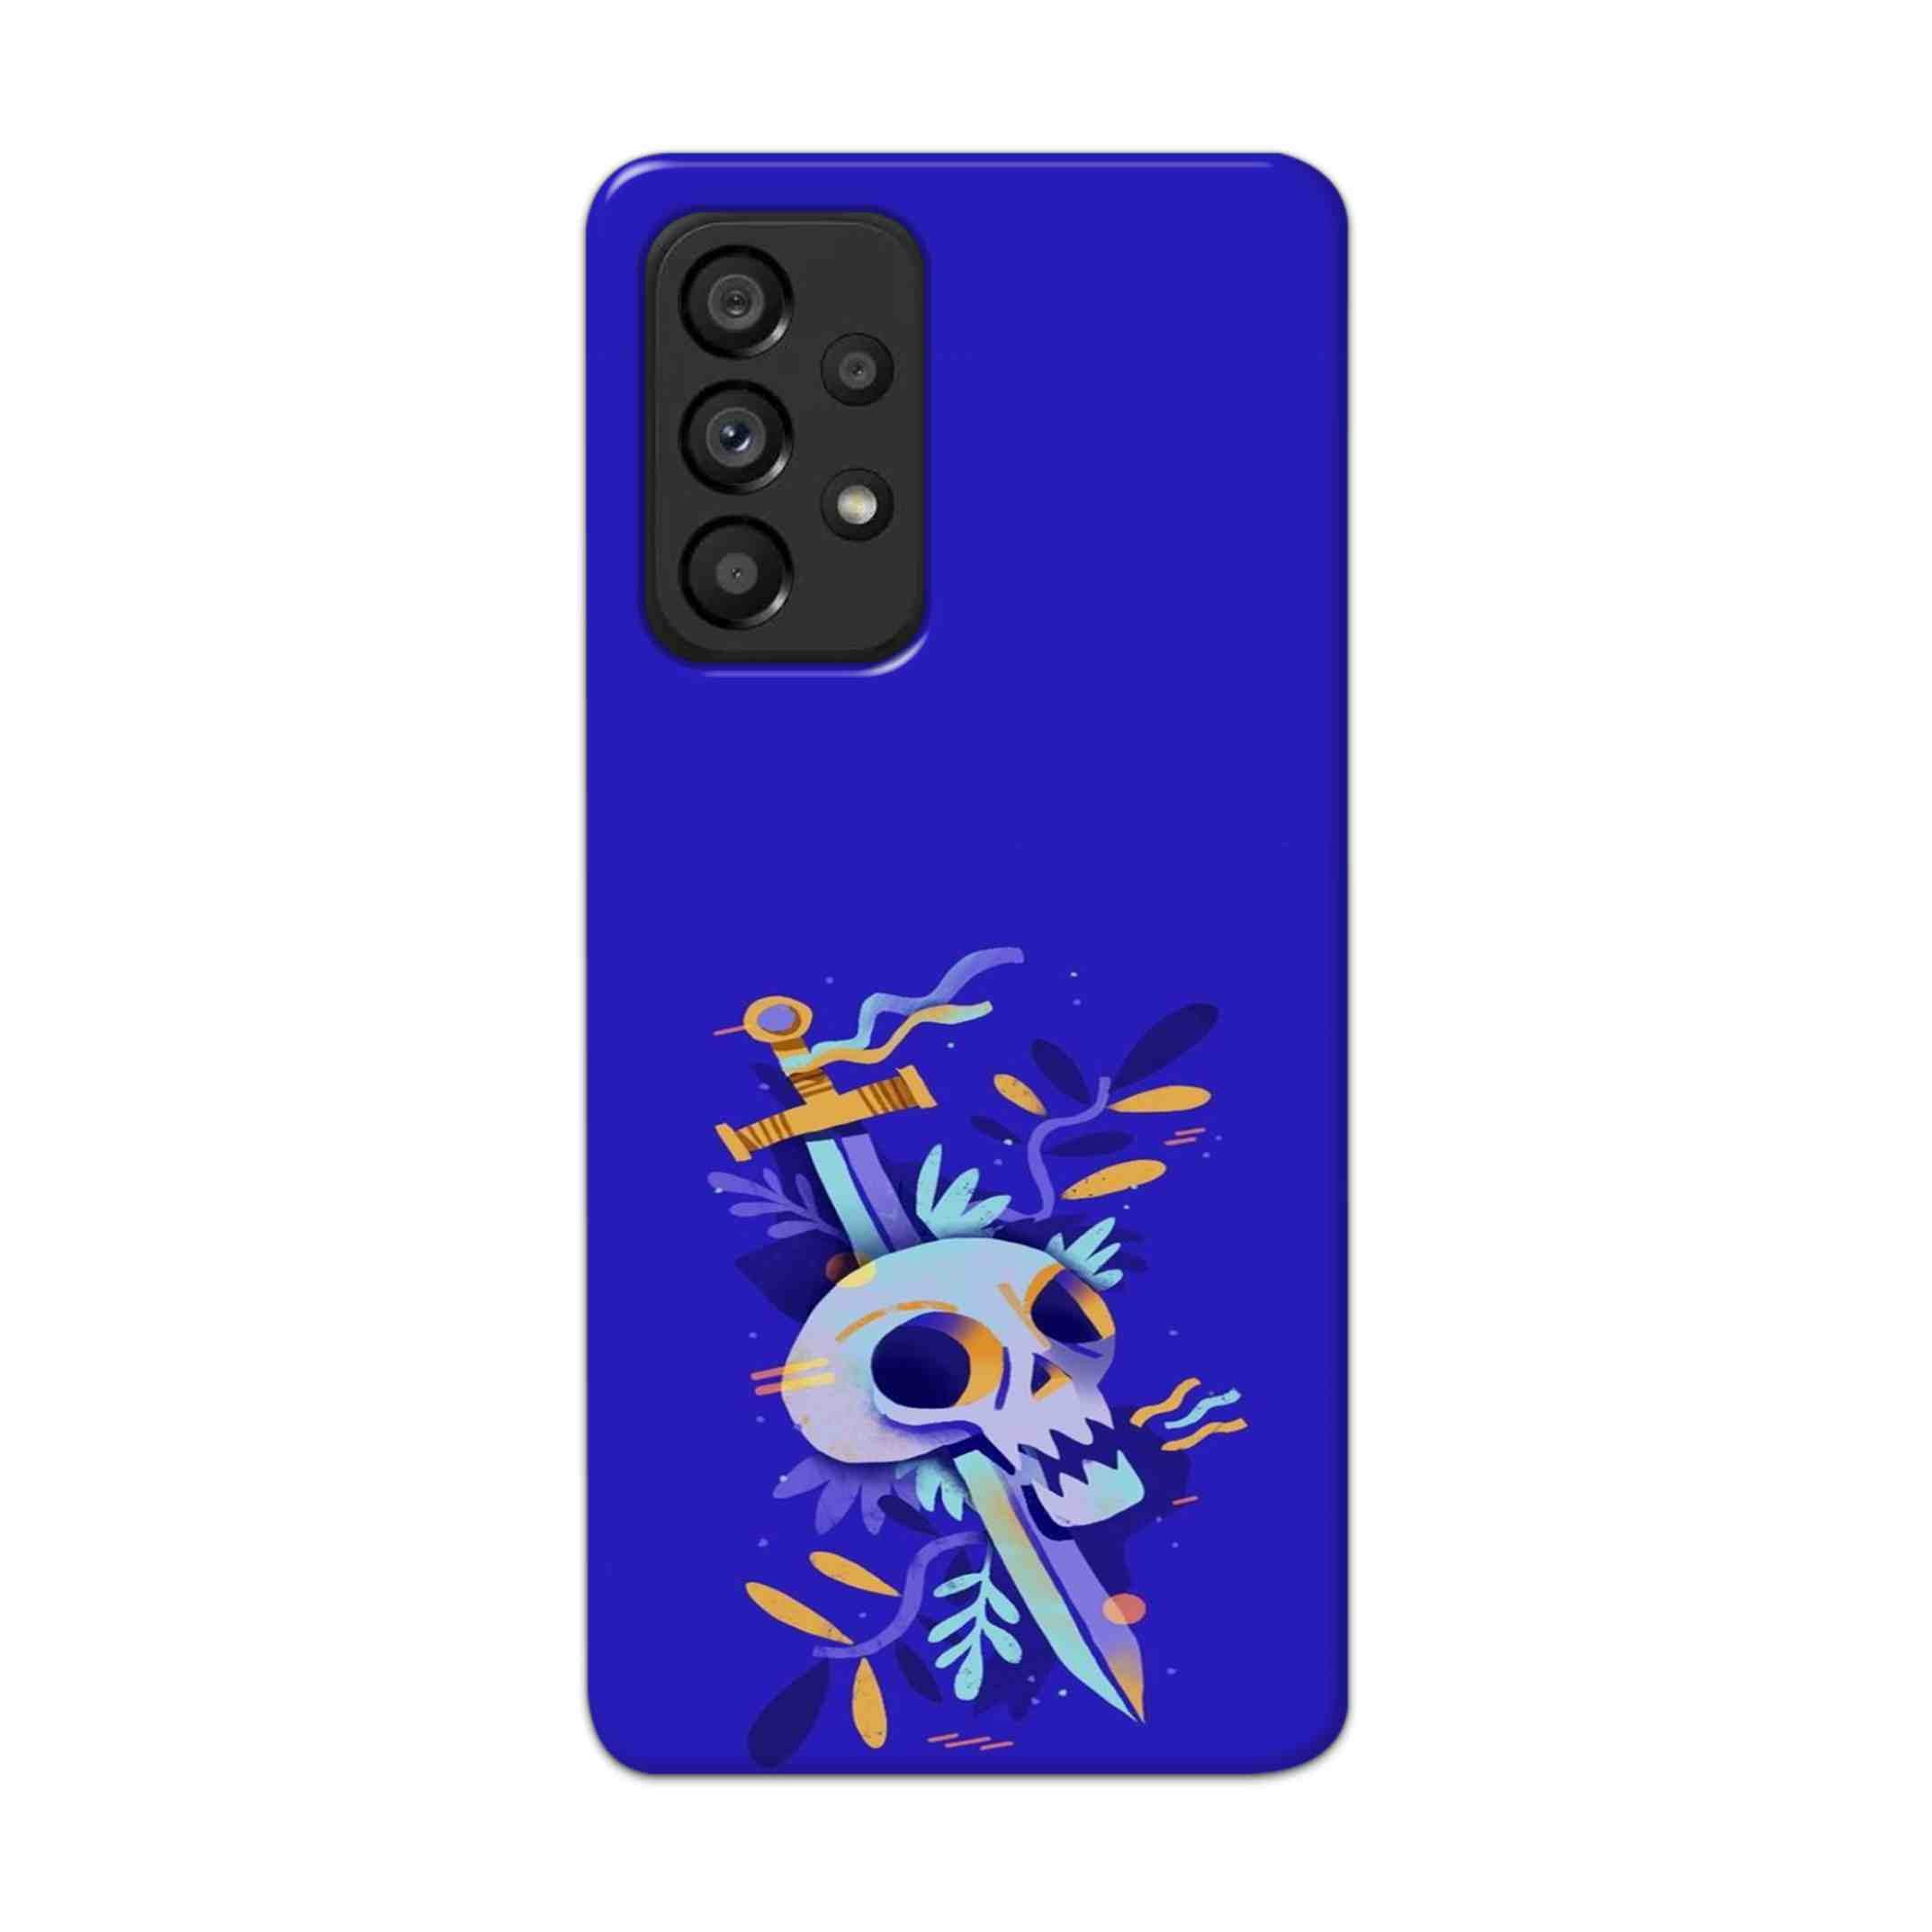 Buy Blue Skull Hard Back Mobile Phone Case Cover For Samsung Galaxy A53 5G Online